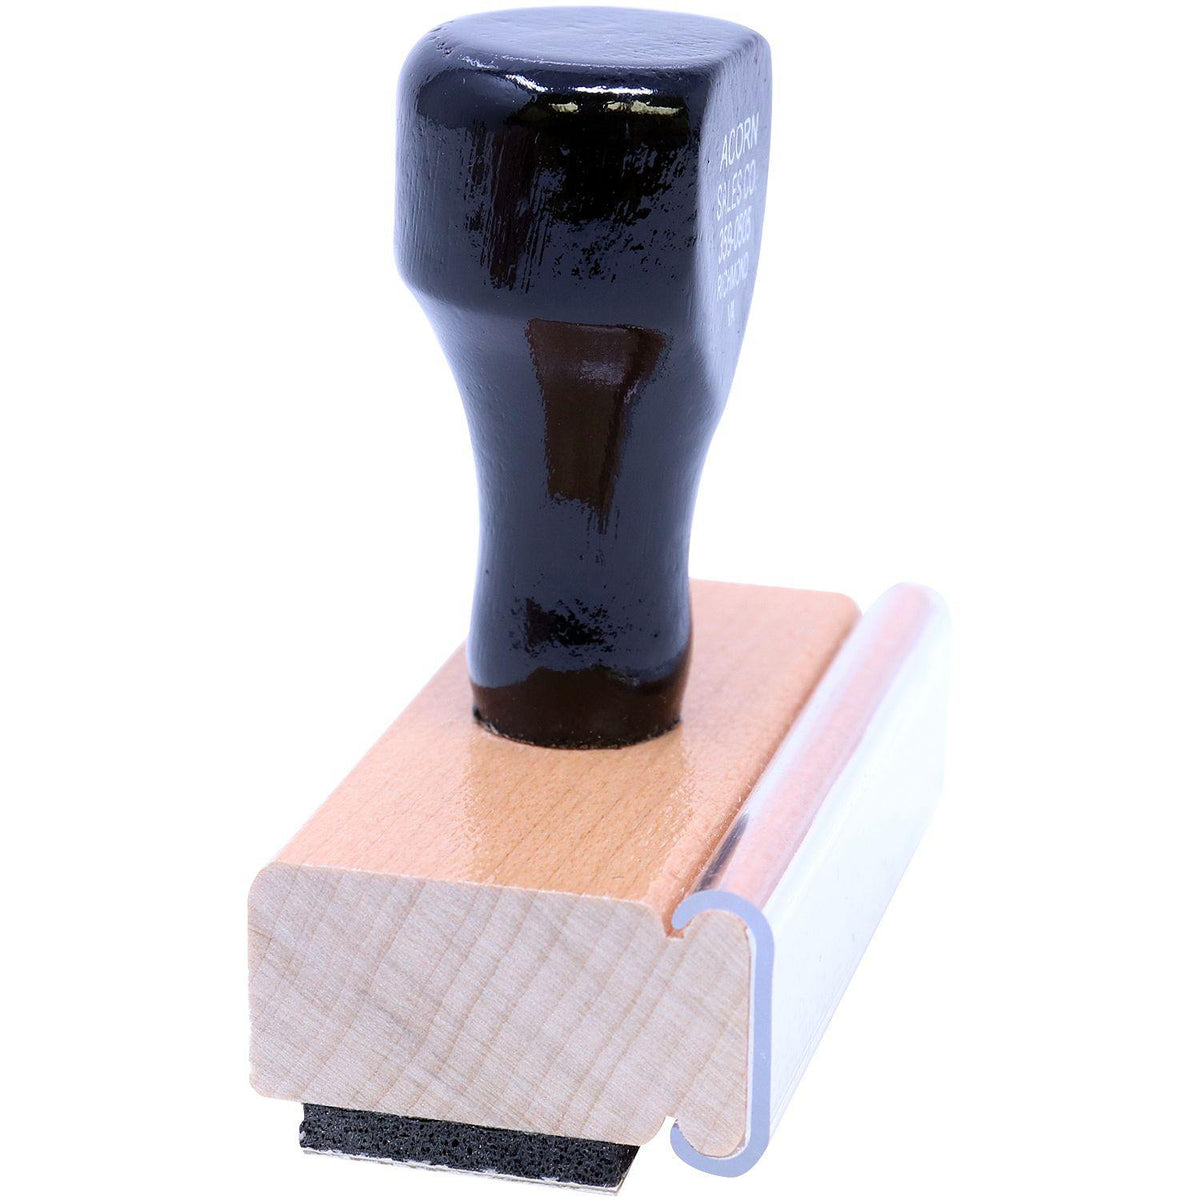 Letter Post Rubber Stamp - Engineer Seal Stamps - Brand_Acorn, Impression Size_Small, Stamp Type_Regular Stamp, Type of Use_General, Type of Use_Postal &amp; Mailing